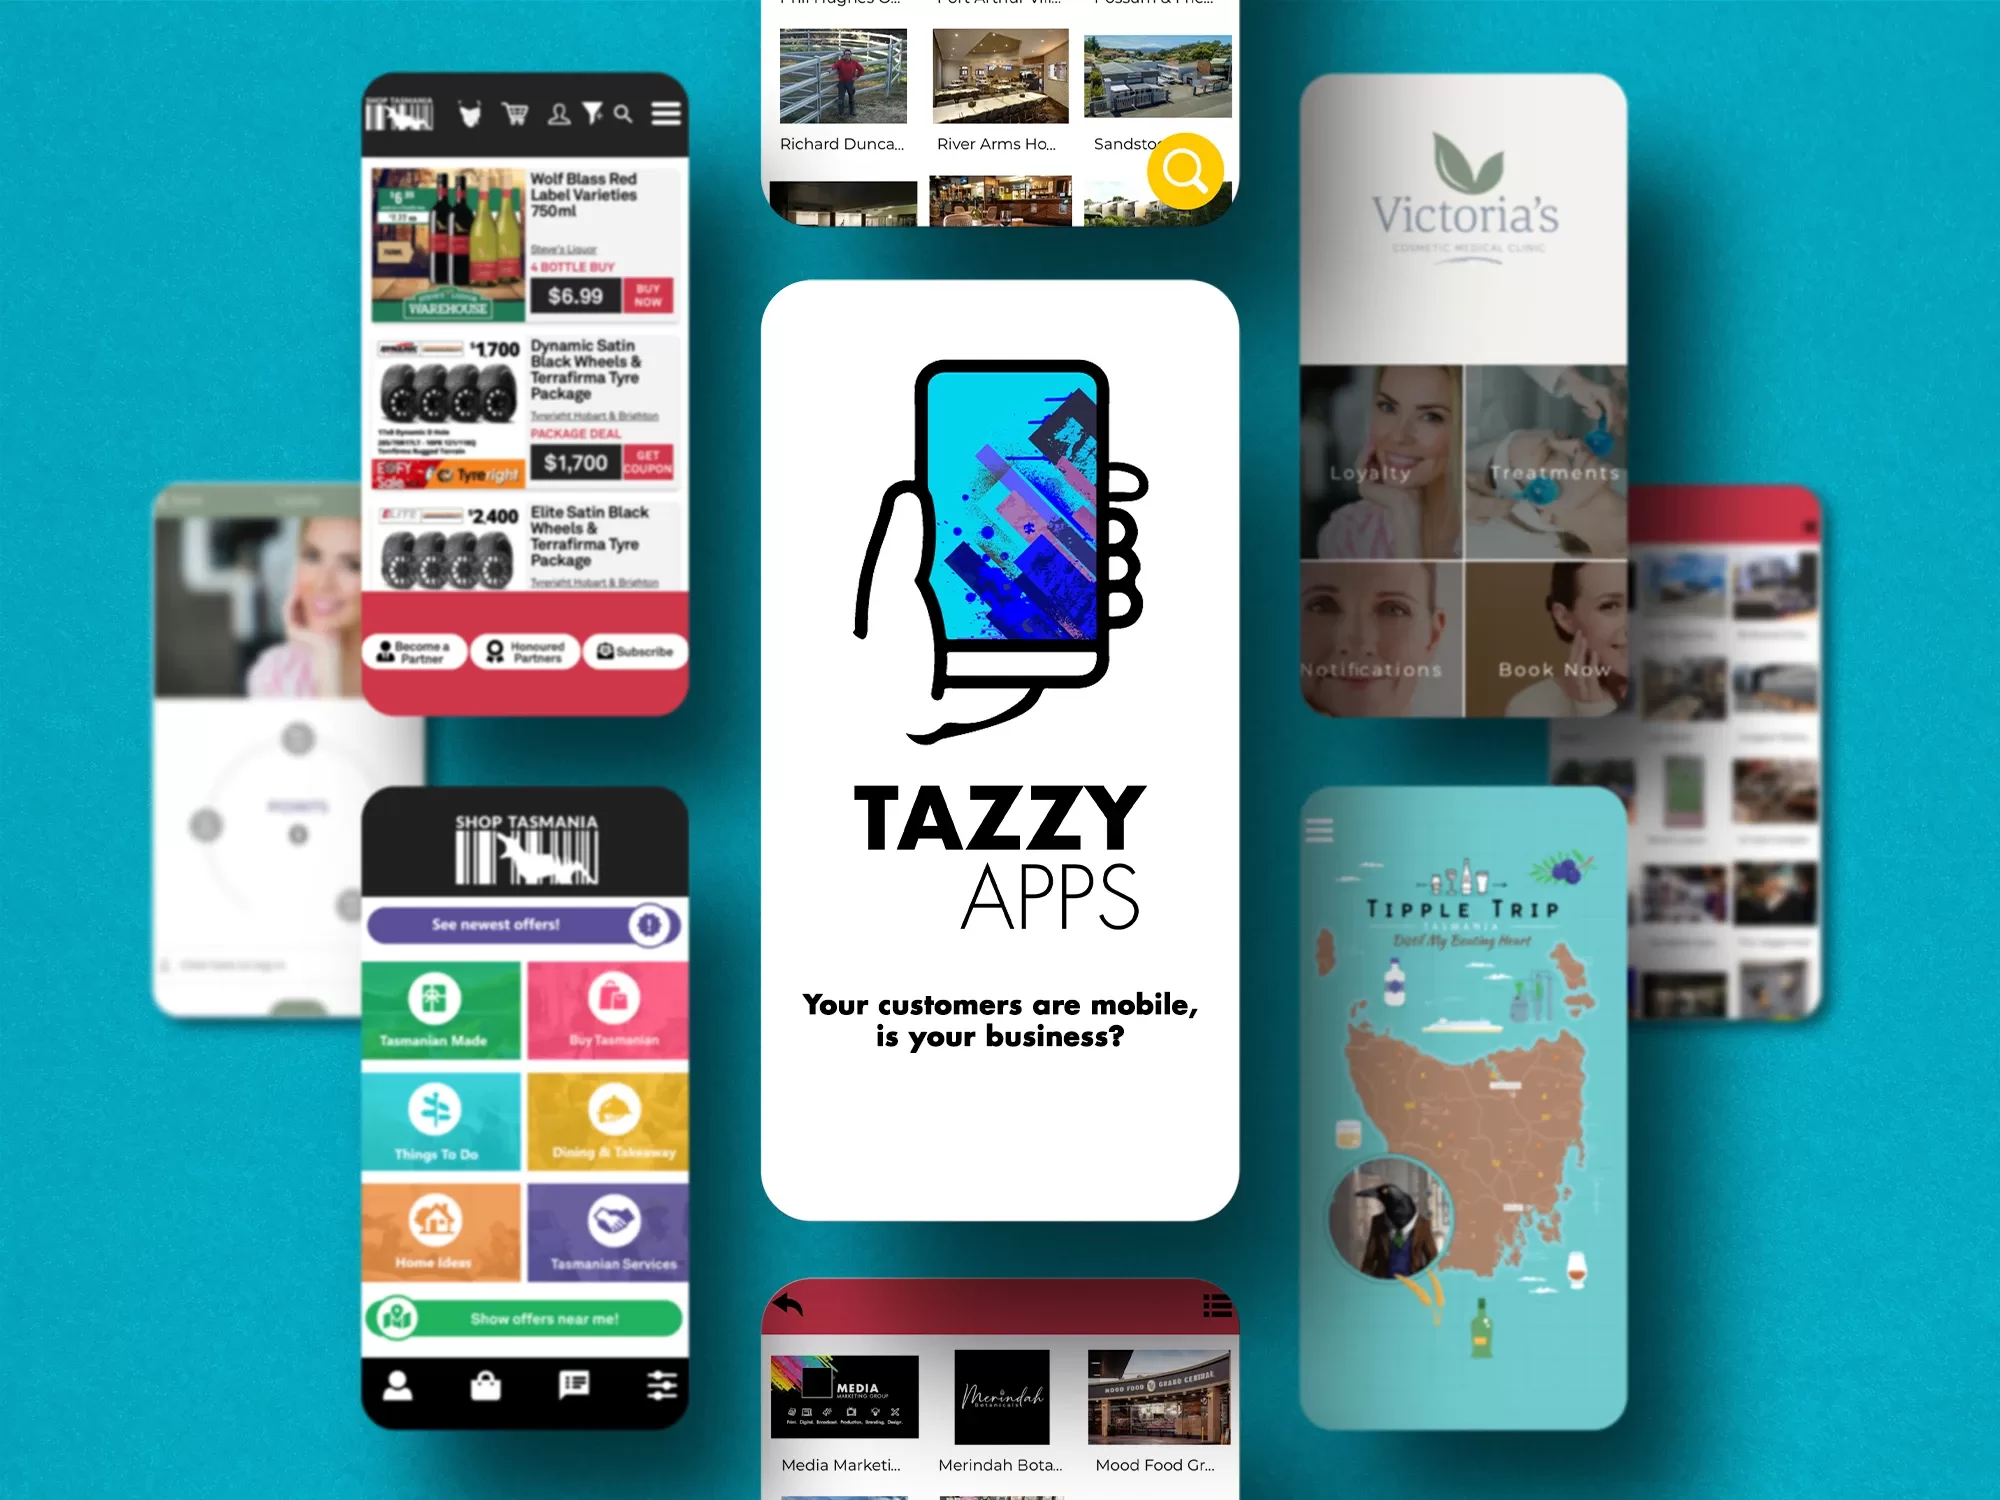 https://marketinggroup.com.au/assets/img/projects/Tazzy-Apps-Image_1.webp